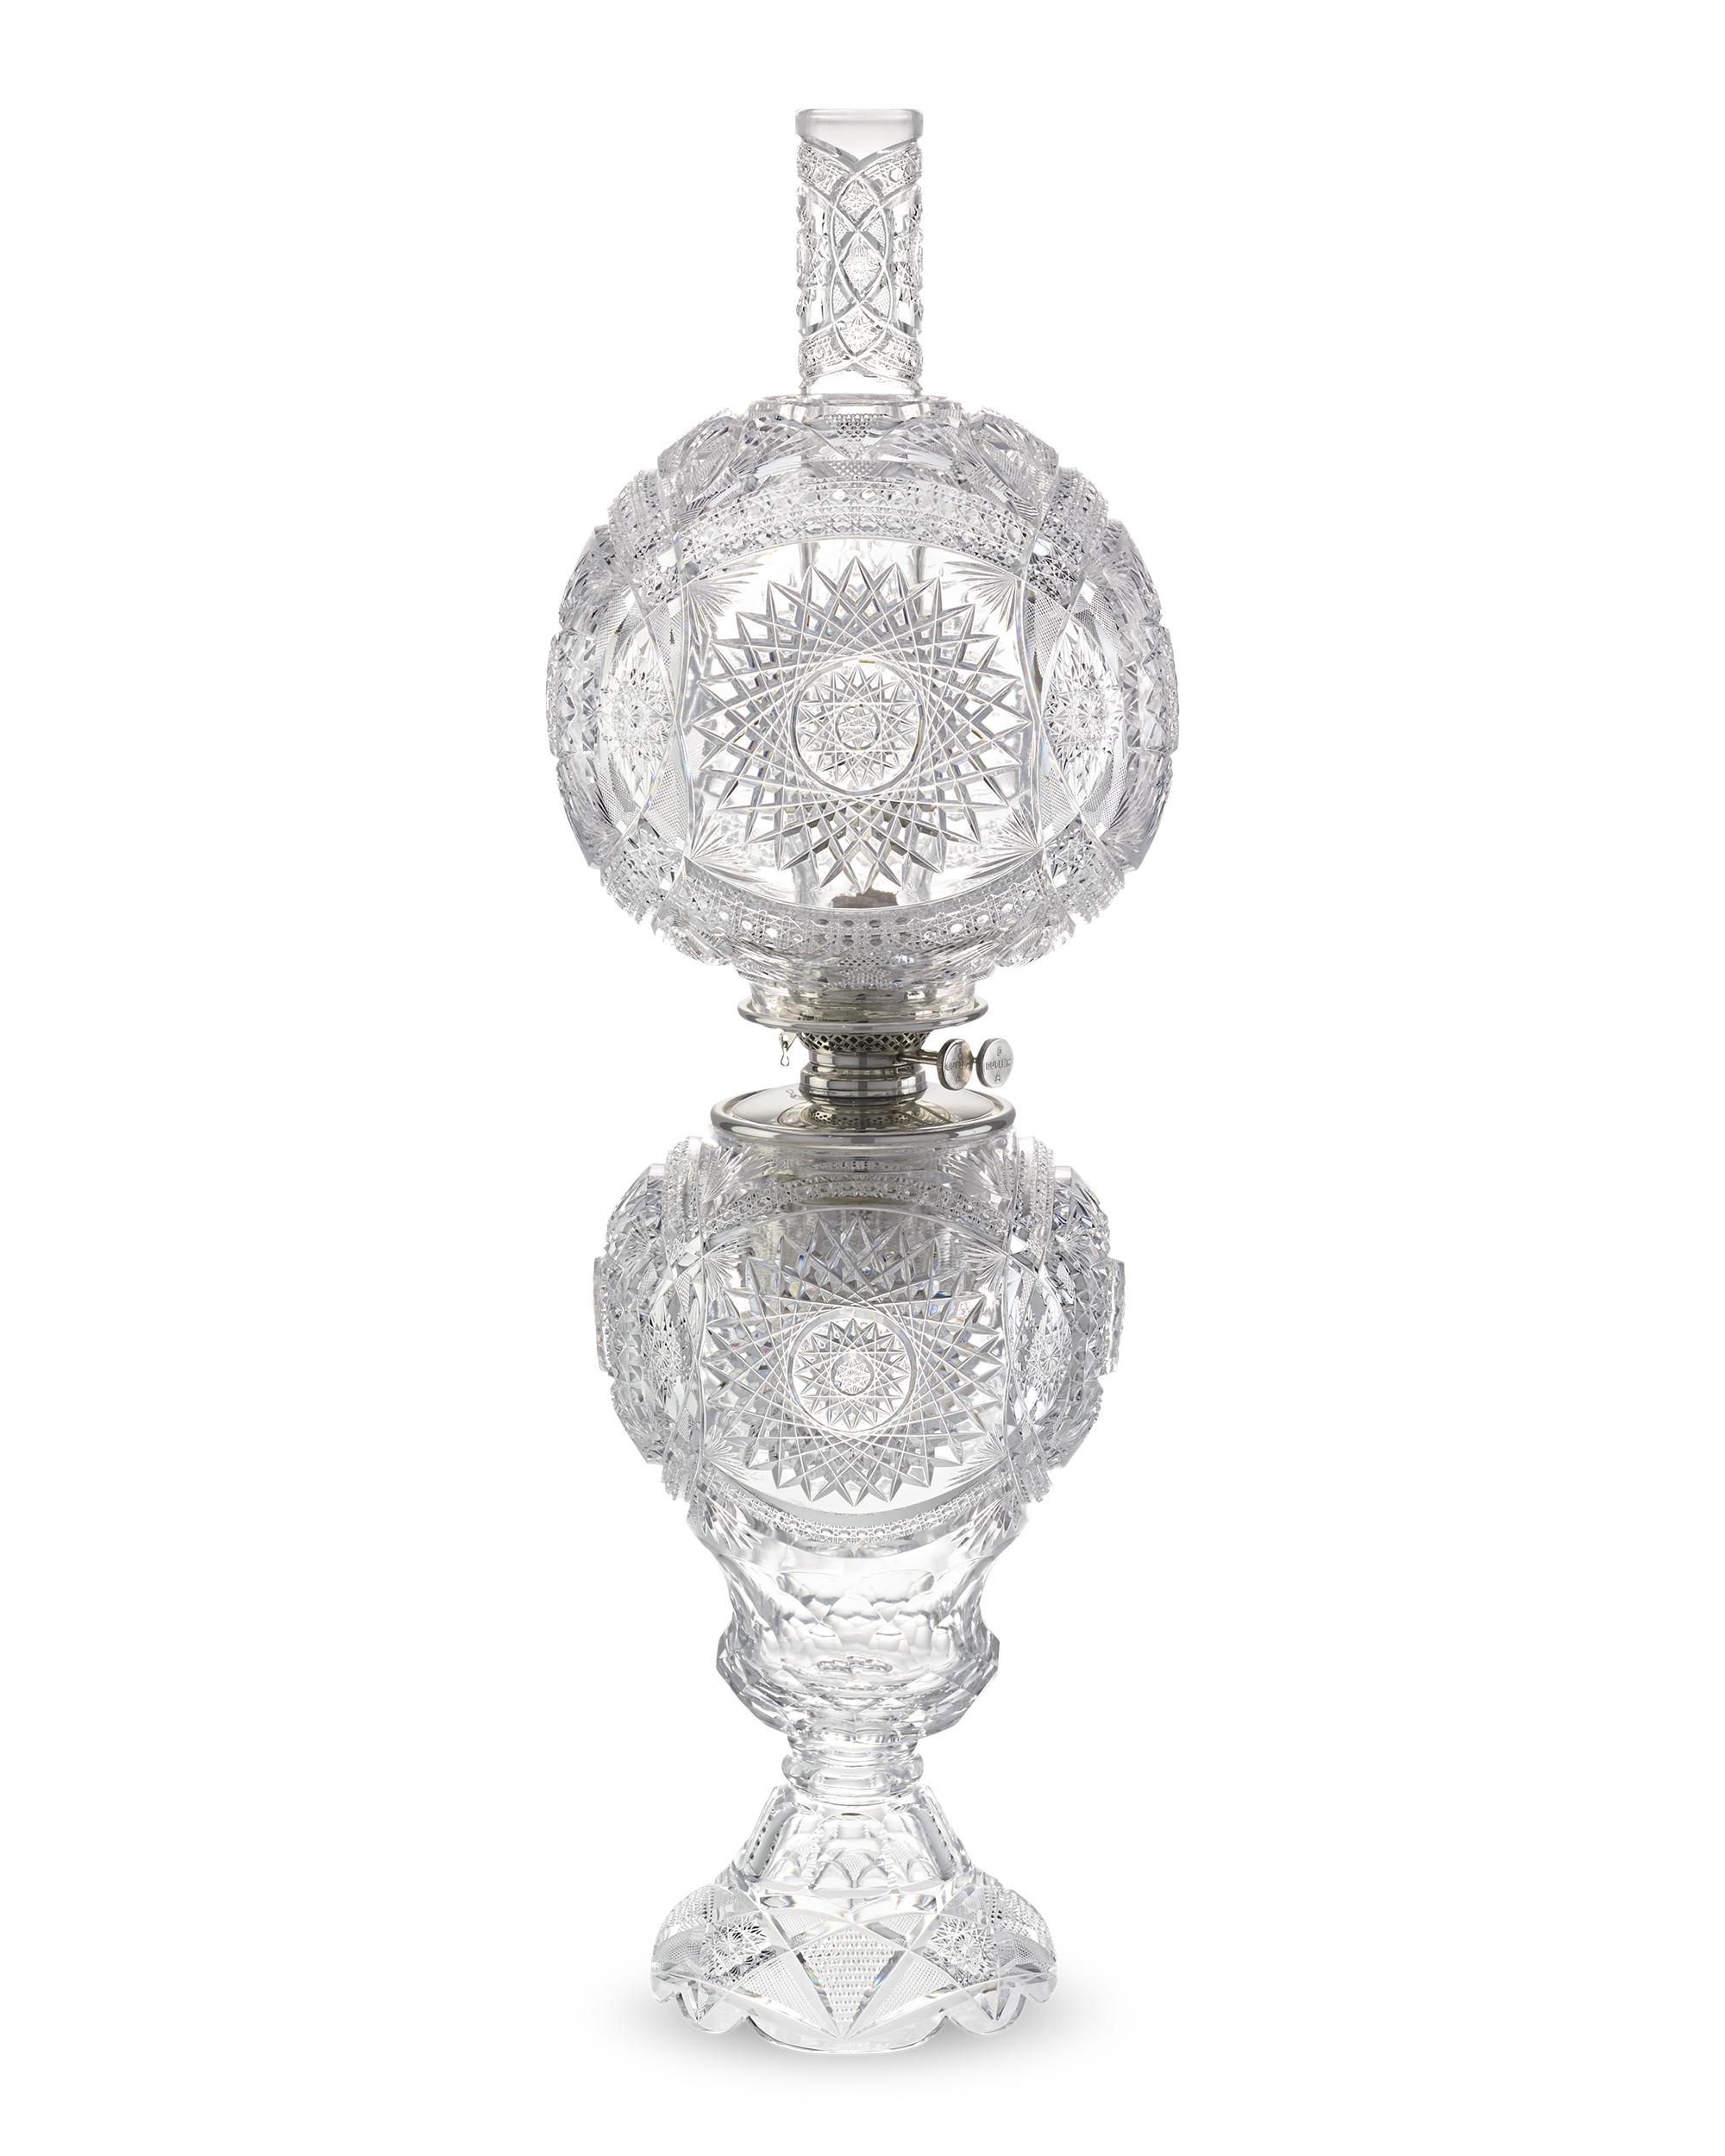 This monumental and complete Gone with the Wind style American Brilliant Cut Glass lamp was almost certainly crafted by the renowned Libbey Glass Company. Only a handful of these extraordinary lamps were created due to the enormous expense involved